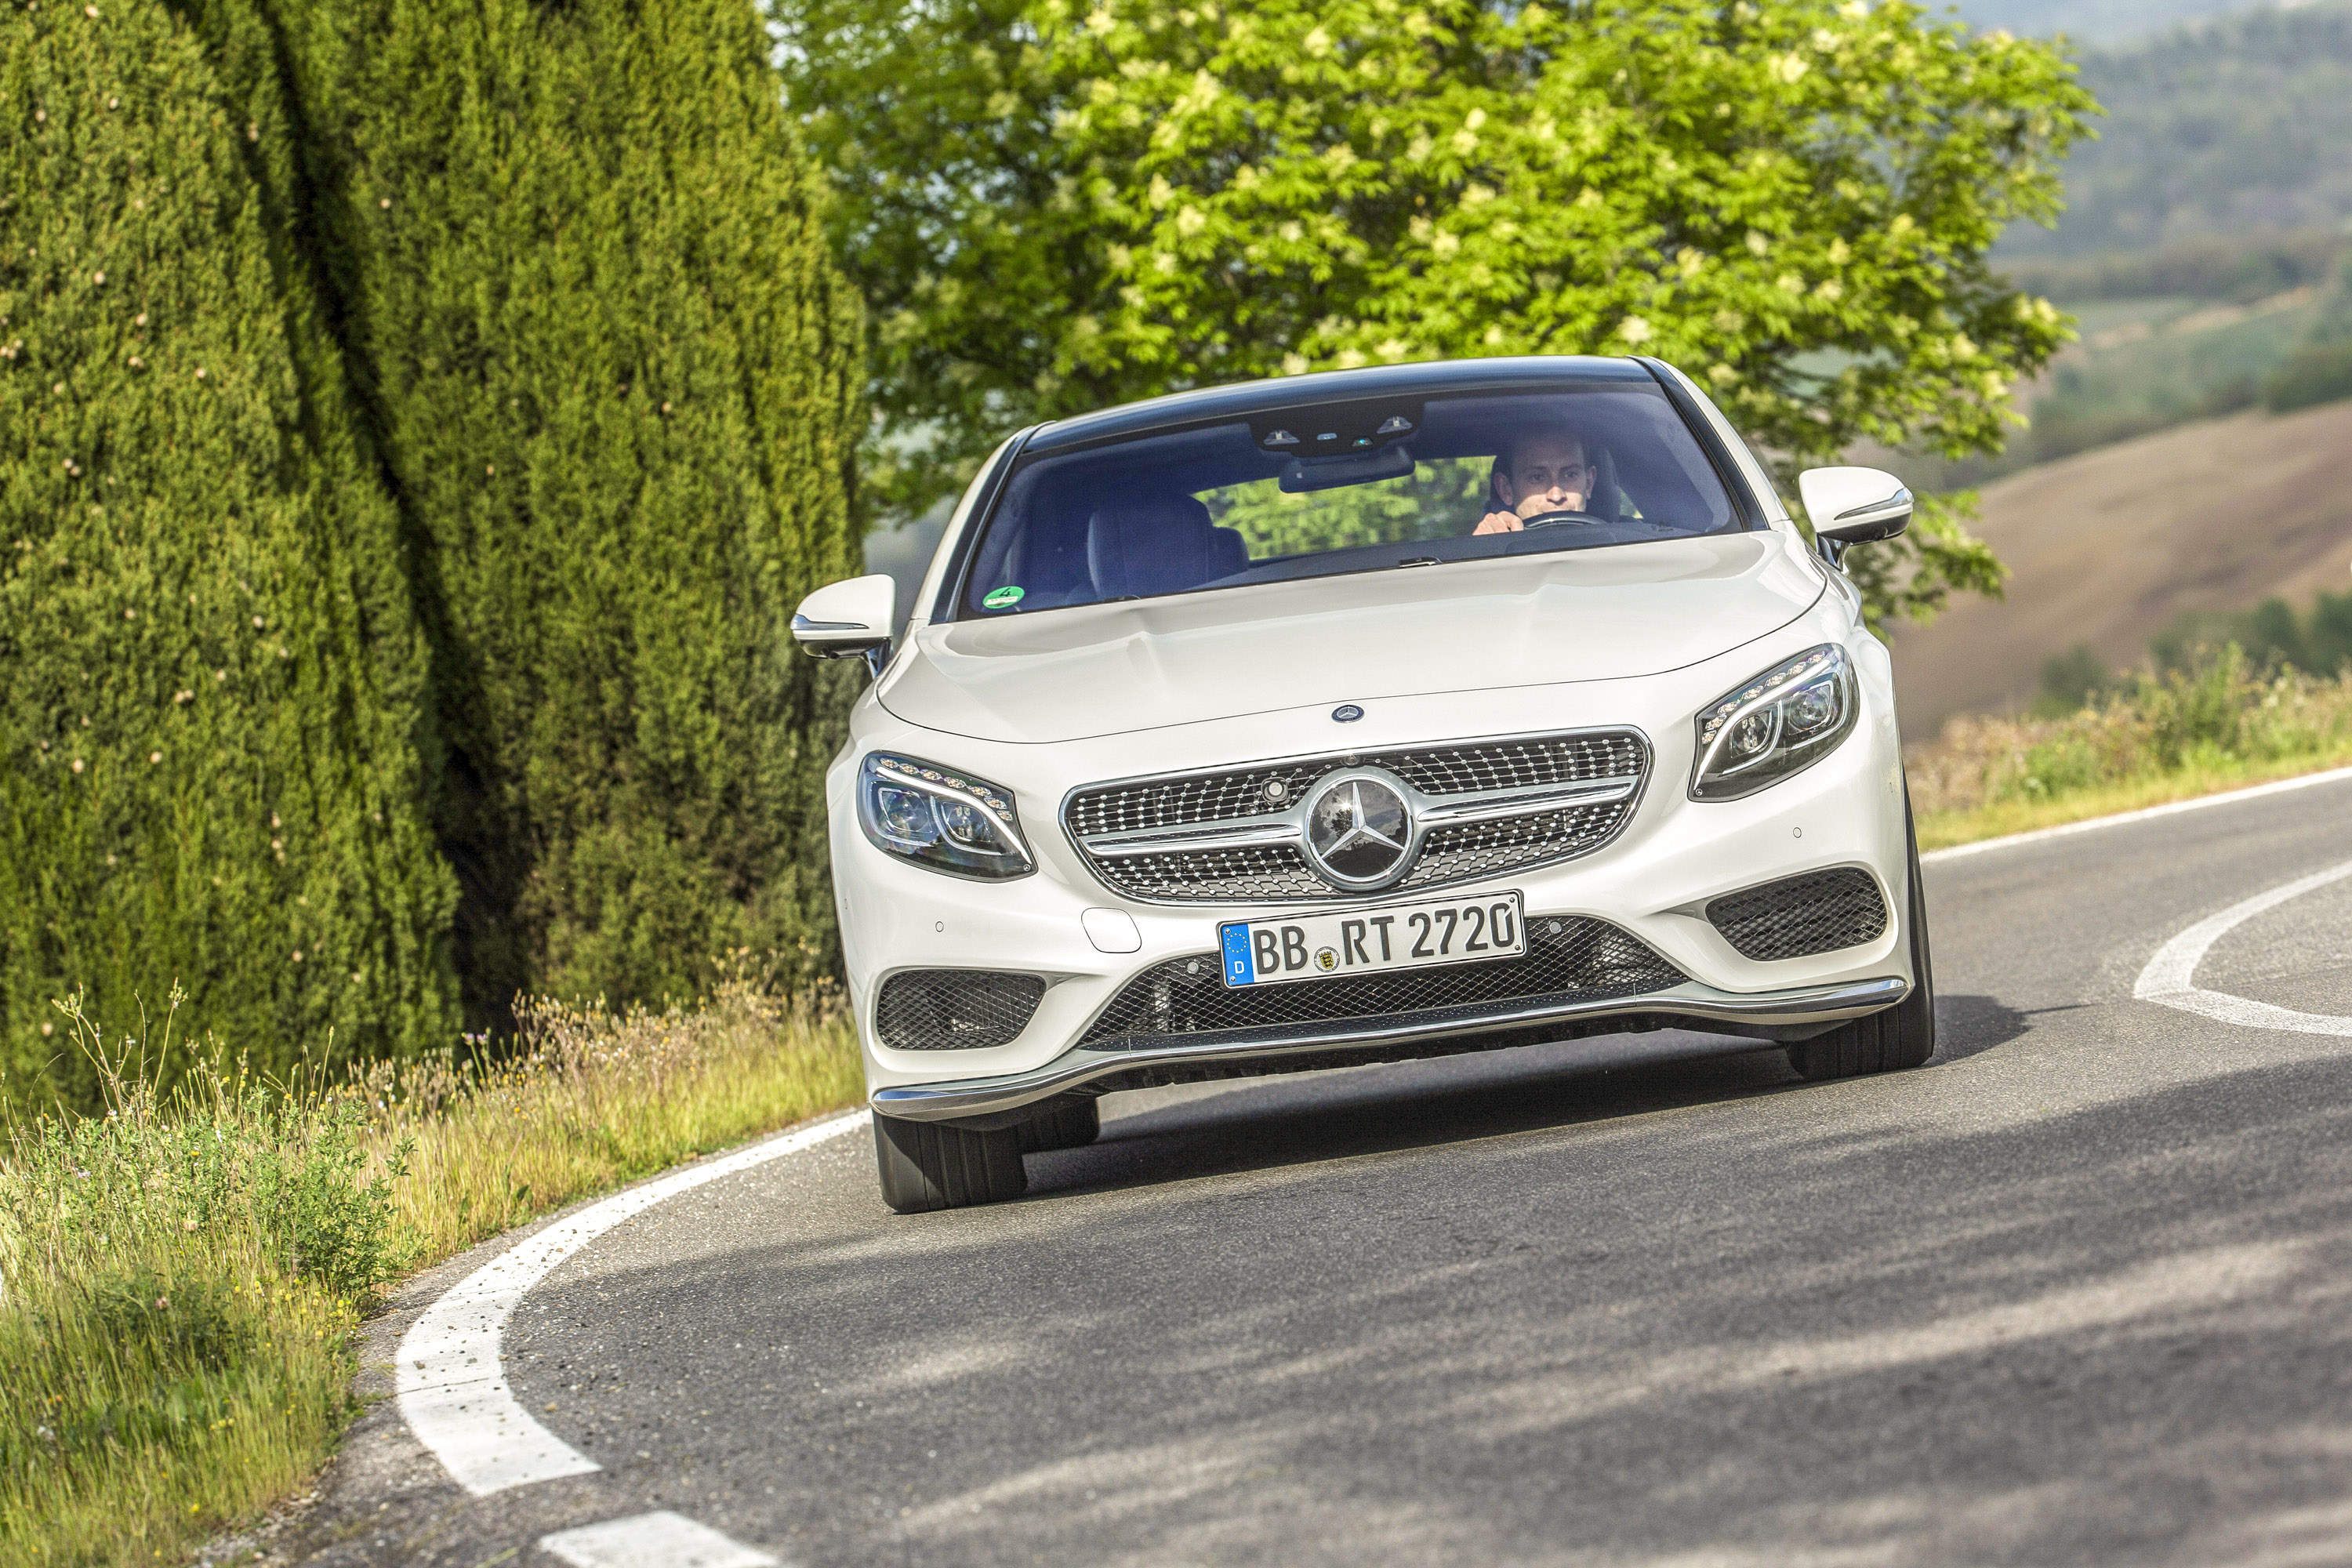 Mercedes-Benz S-Class Coupe Curve Control System